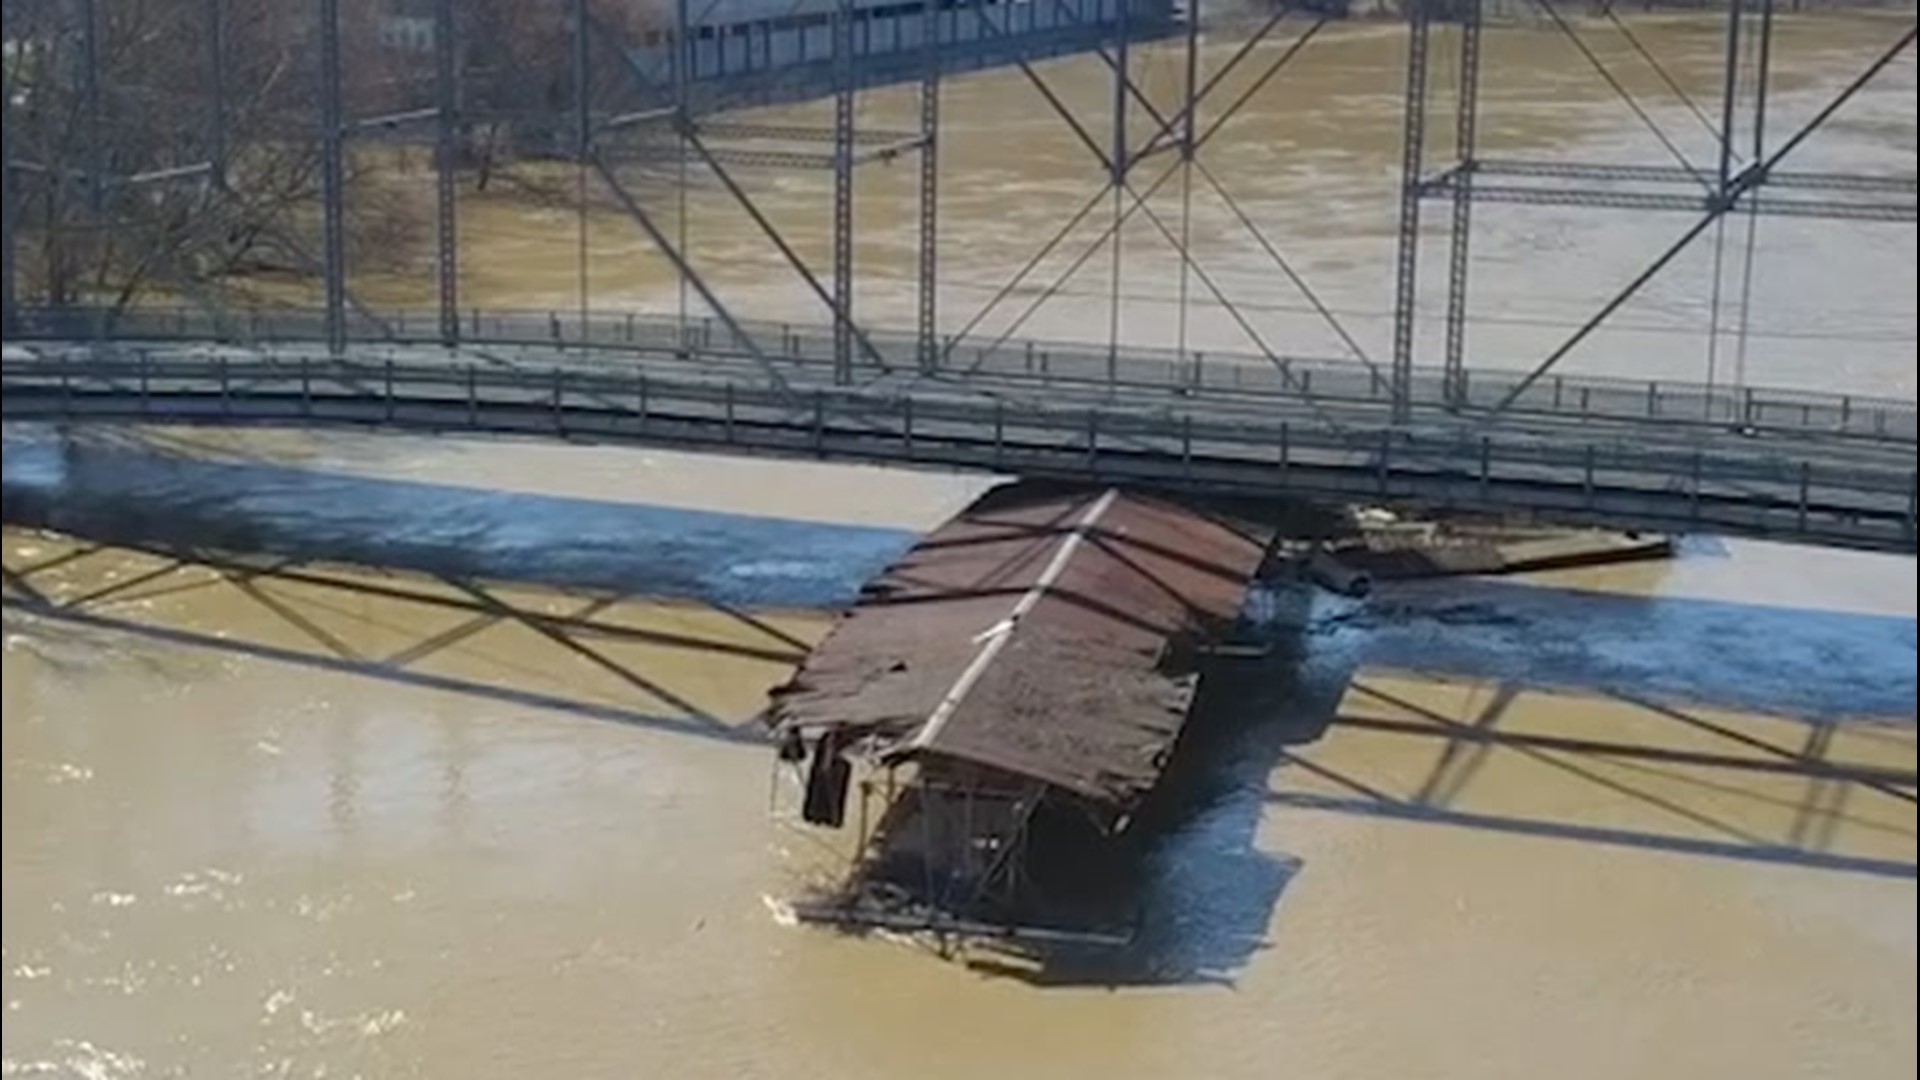 Drone footage shows a 200-foot-long marina, which broke loose amid heavy flooding, ramming into the Singing Bridge in Frankfort, Kentucky, on March 3.